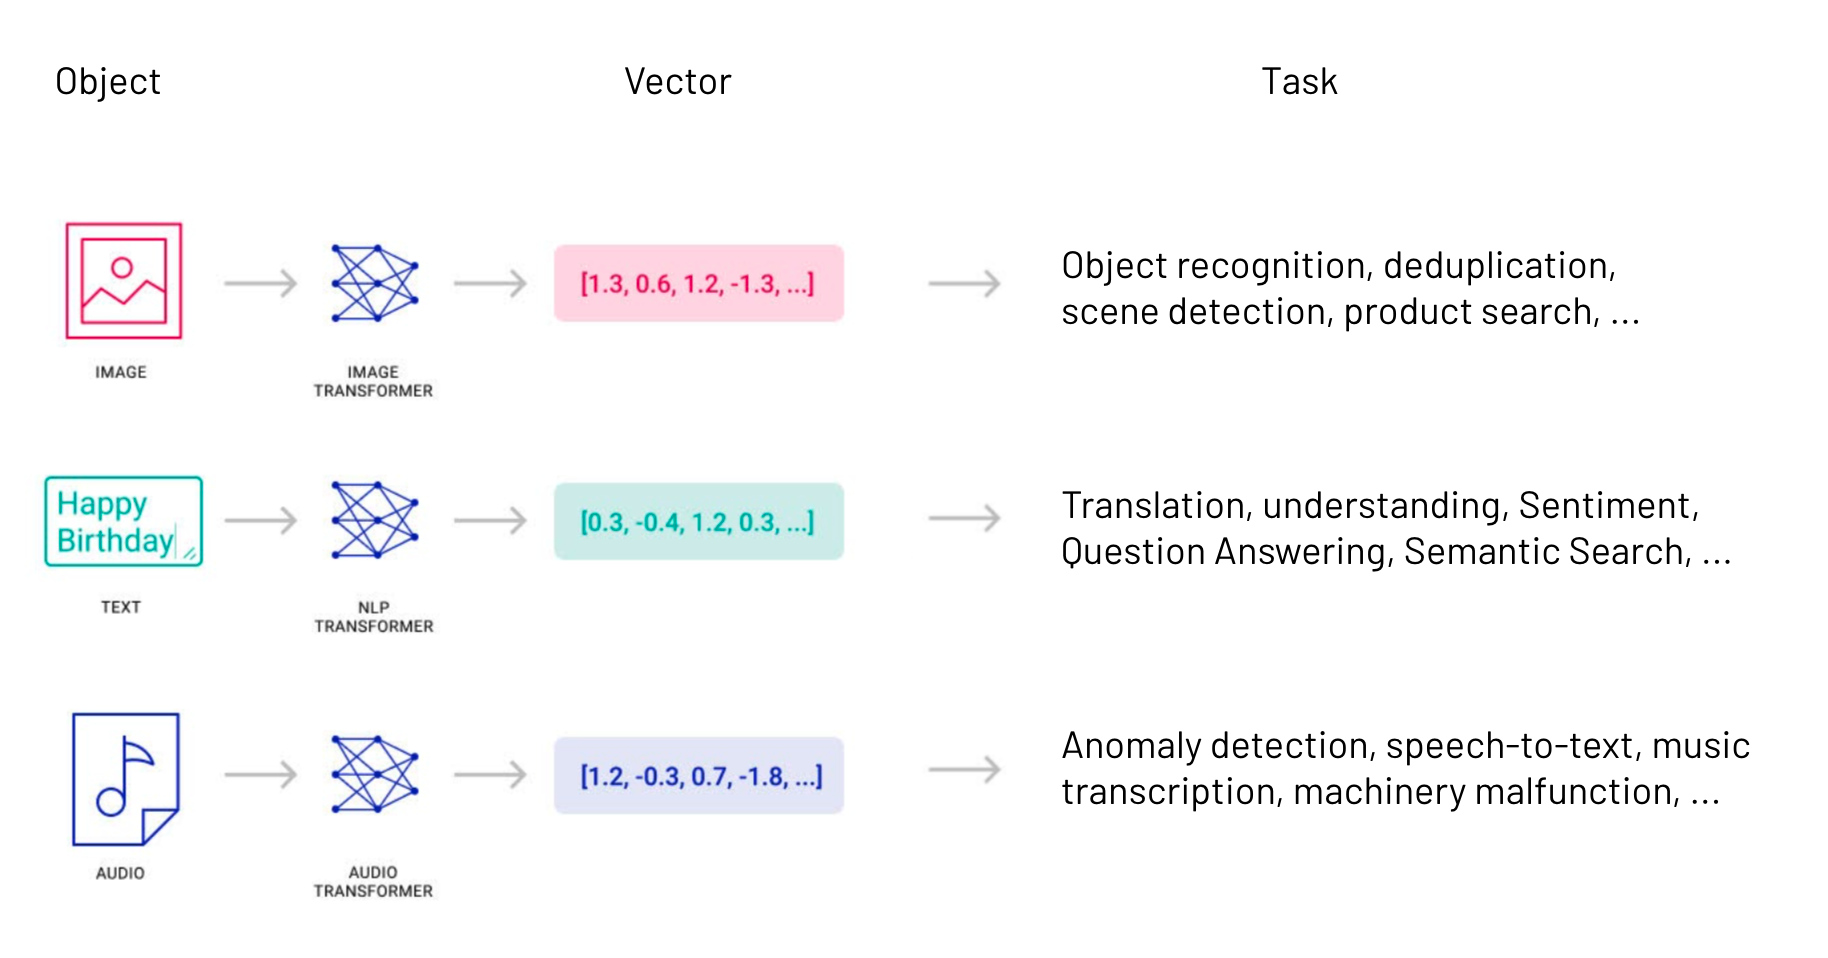 Diagram showing how objects like images, text and audio are transformed into vectors to complete various tasks like object recognition, deduplication, translation, anomaly detection and more.